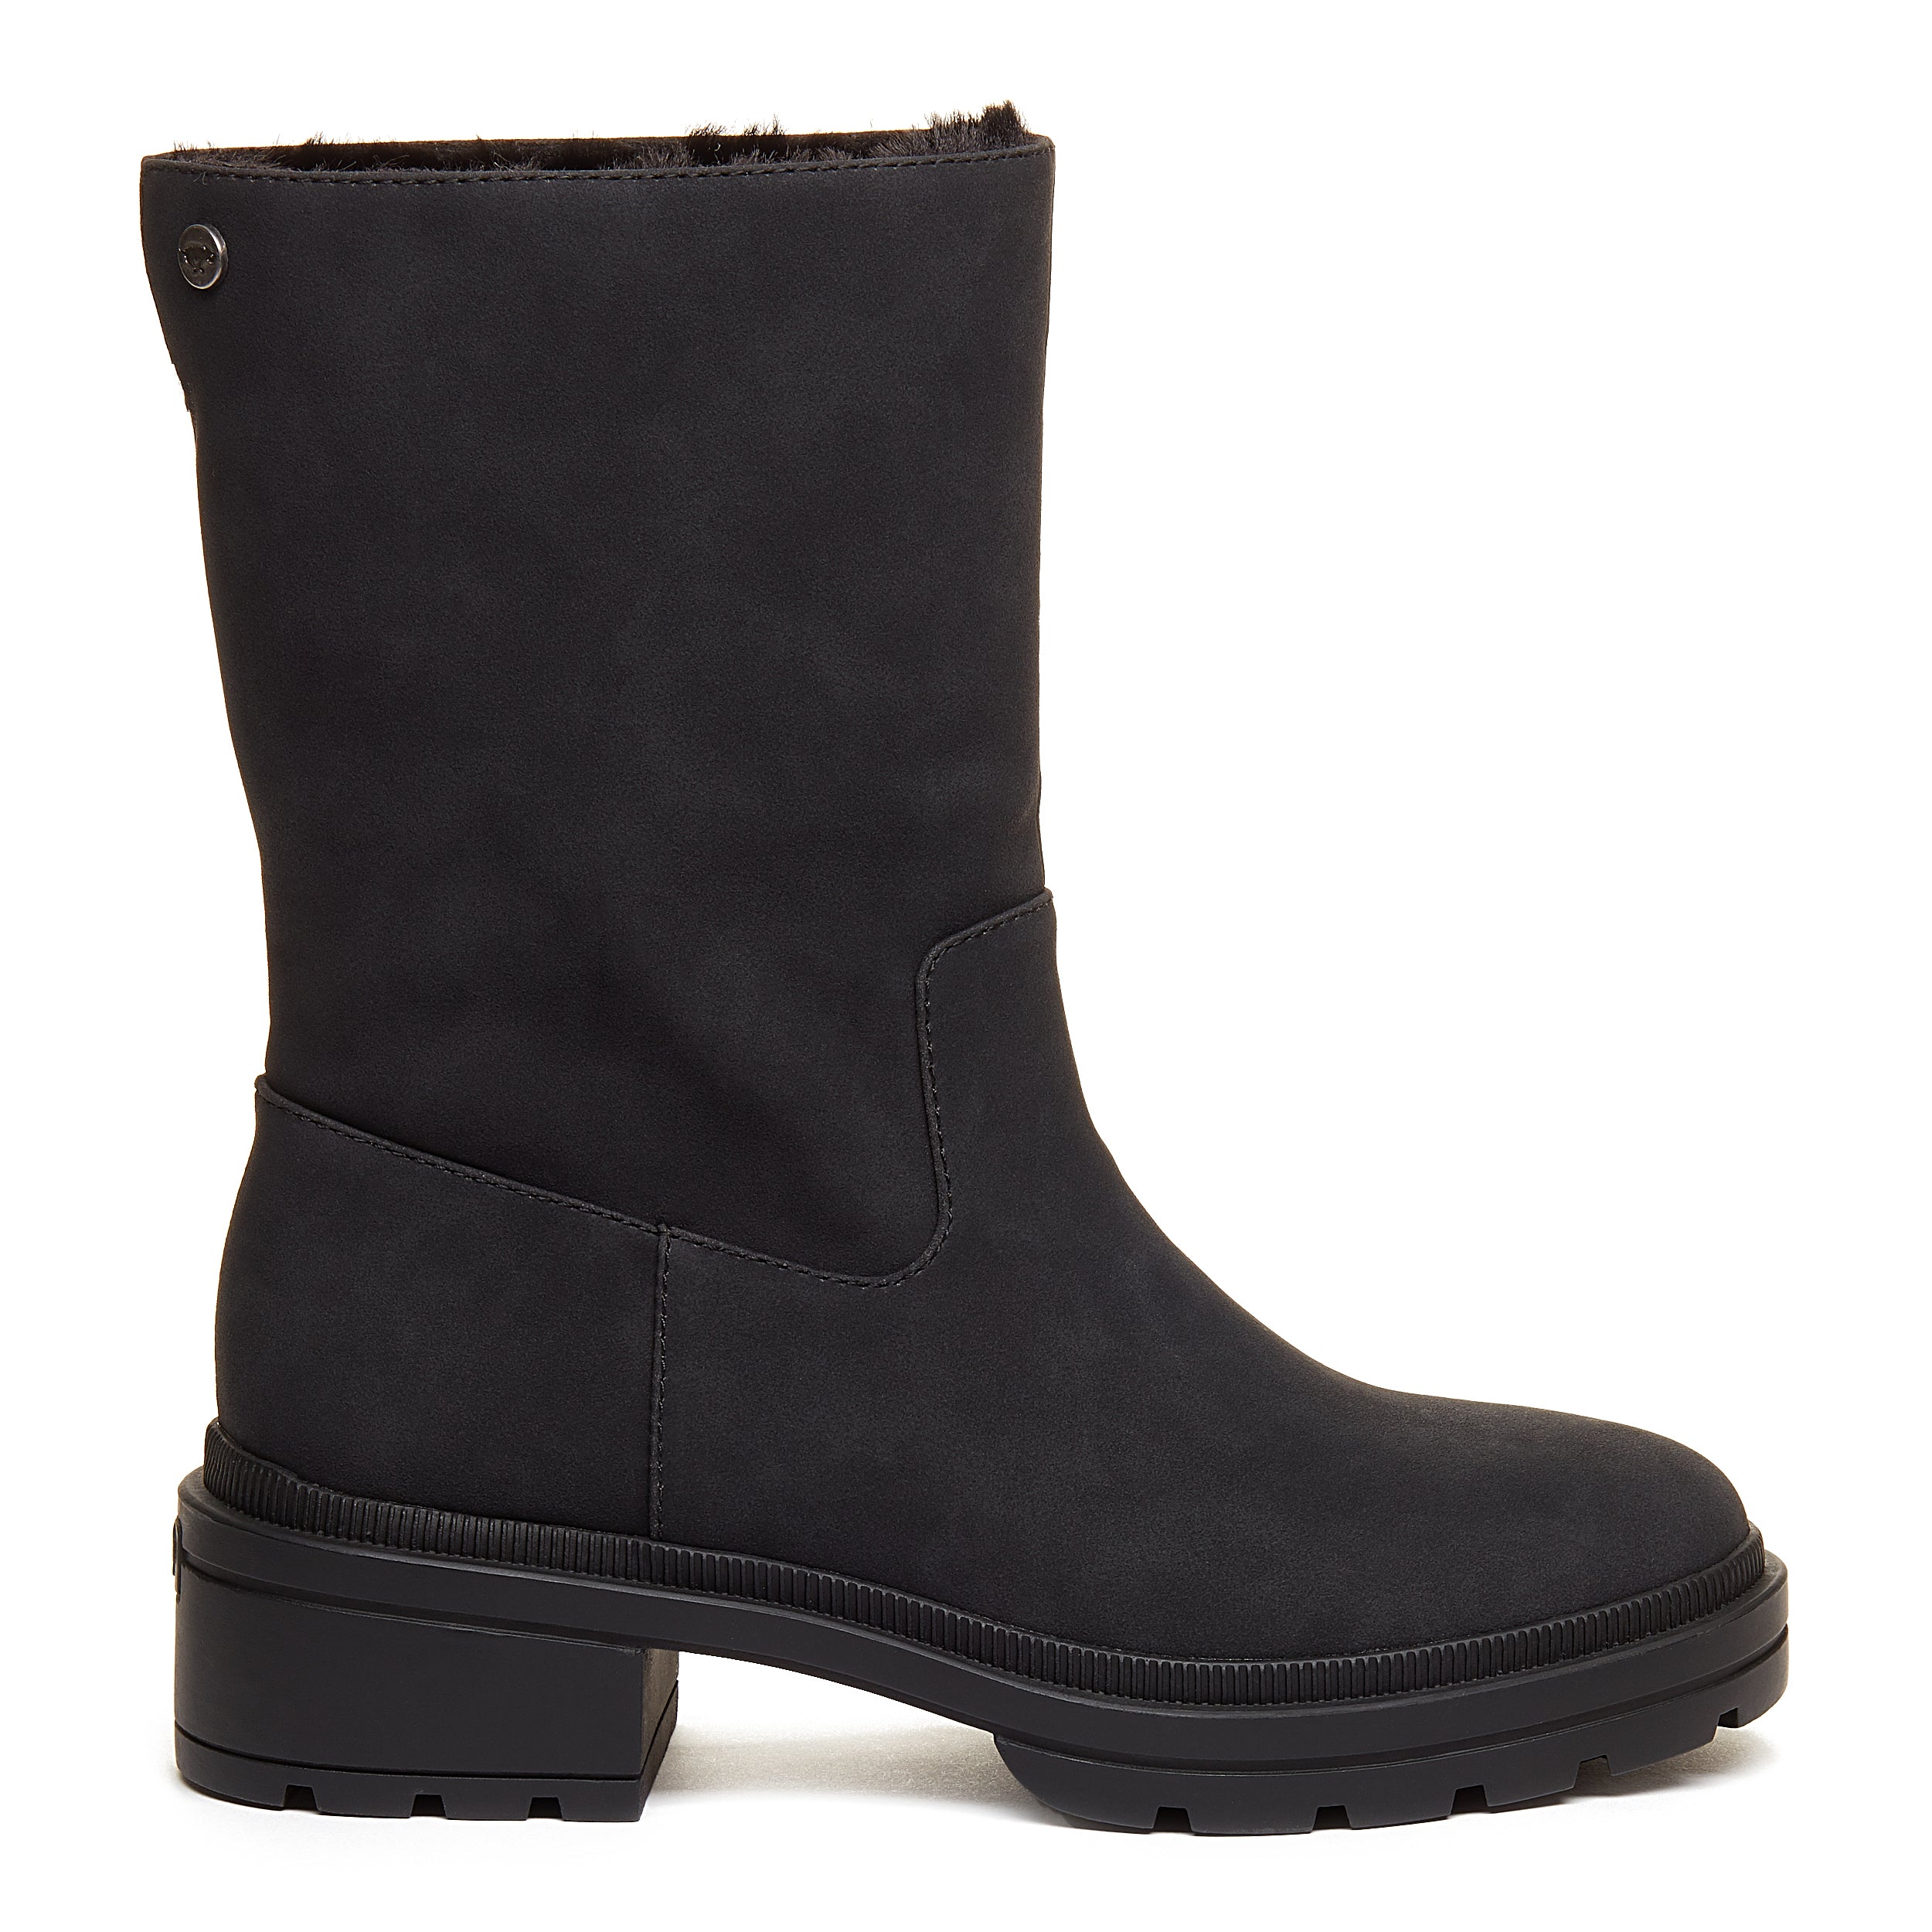 Image of Idea Black Roll Down Winter Boots